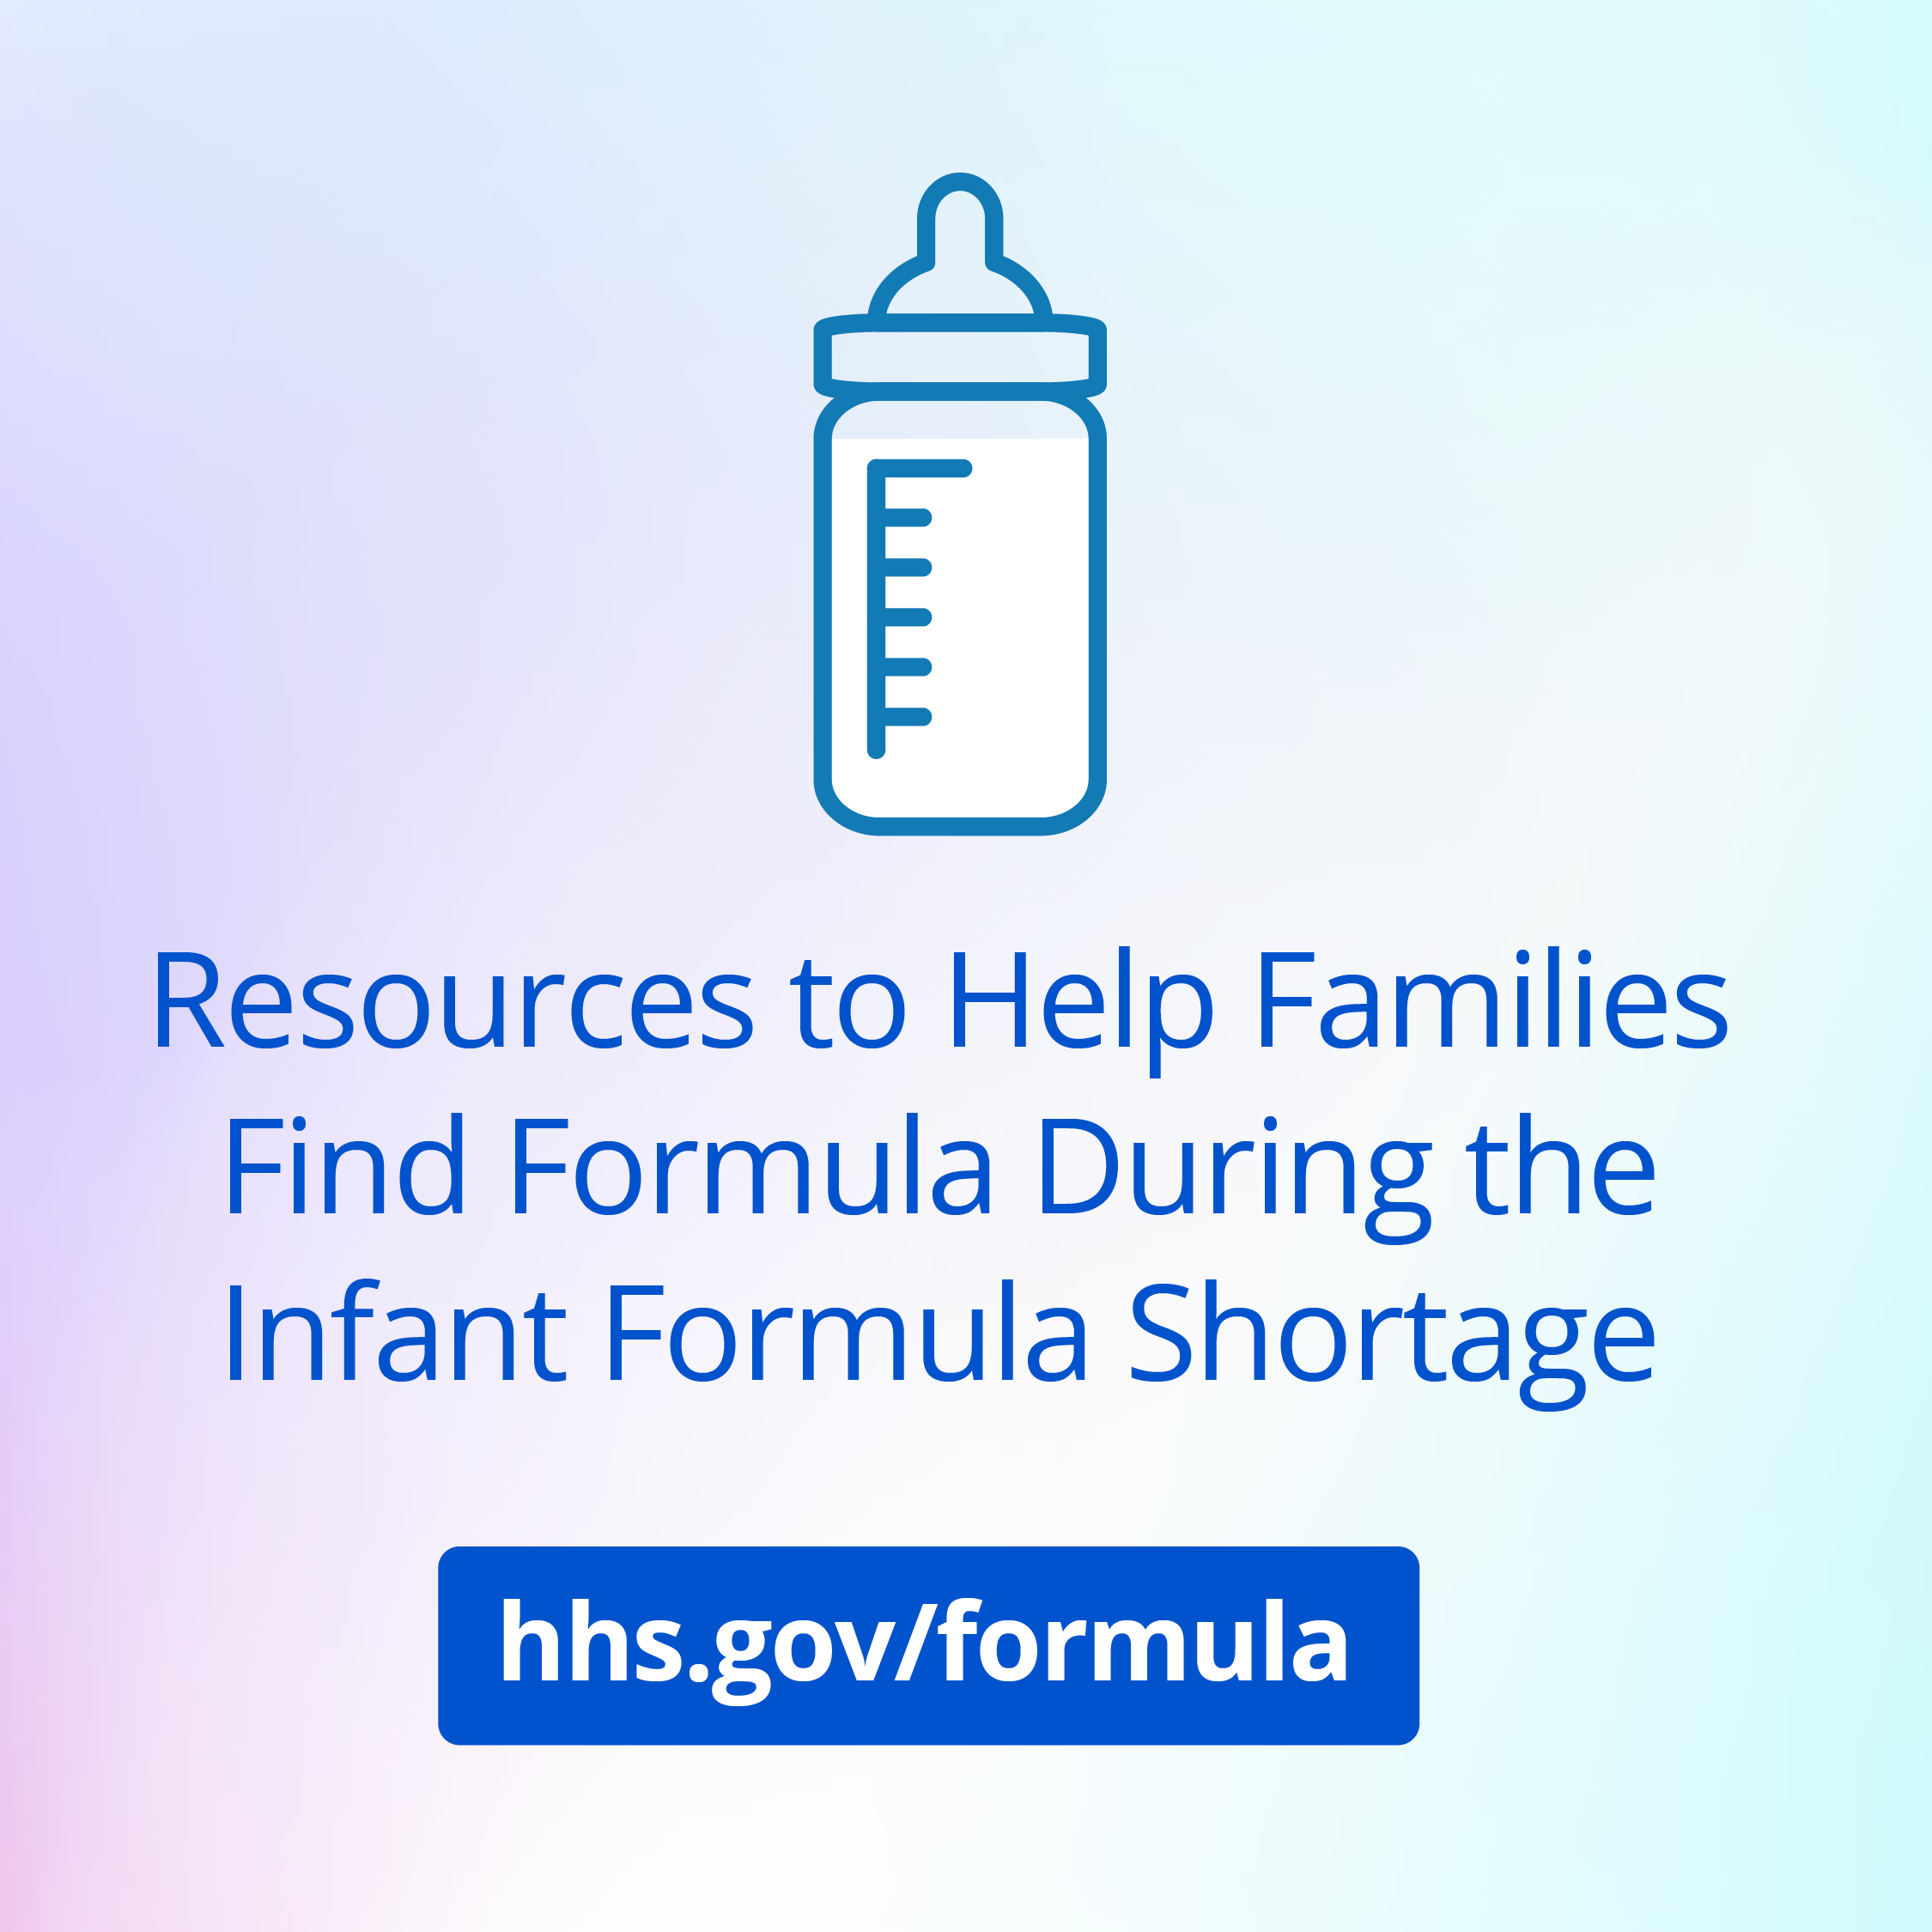 Instagram promo graphic to find resources for the infant formula shortage at hhs.gov/formula in English.